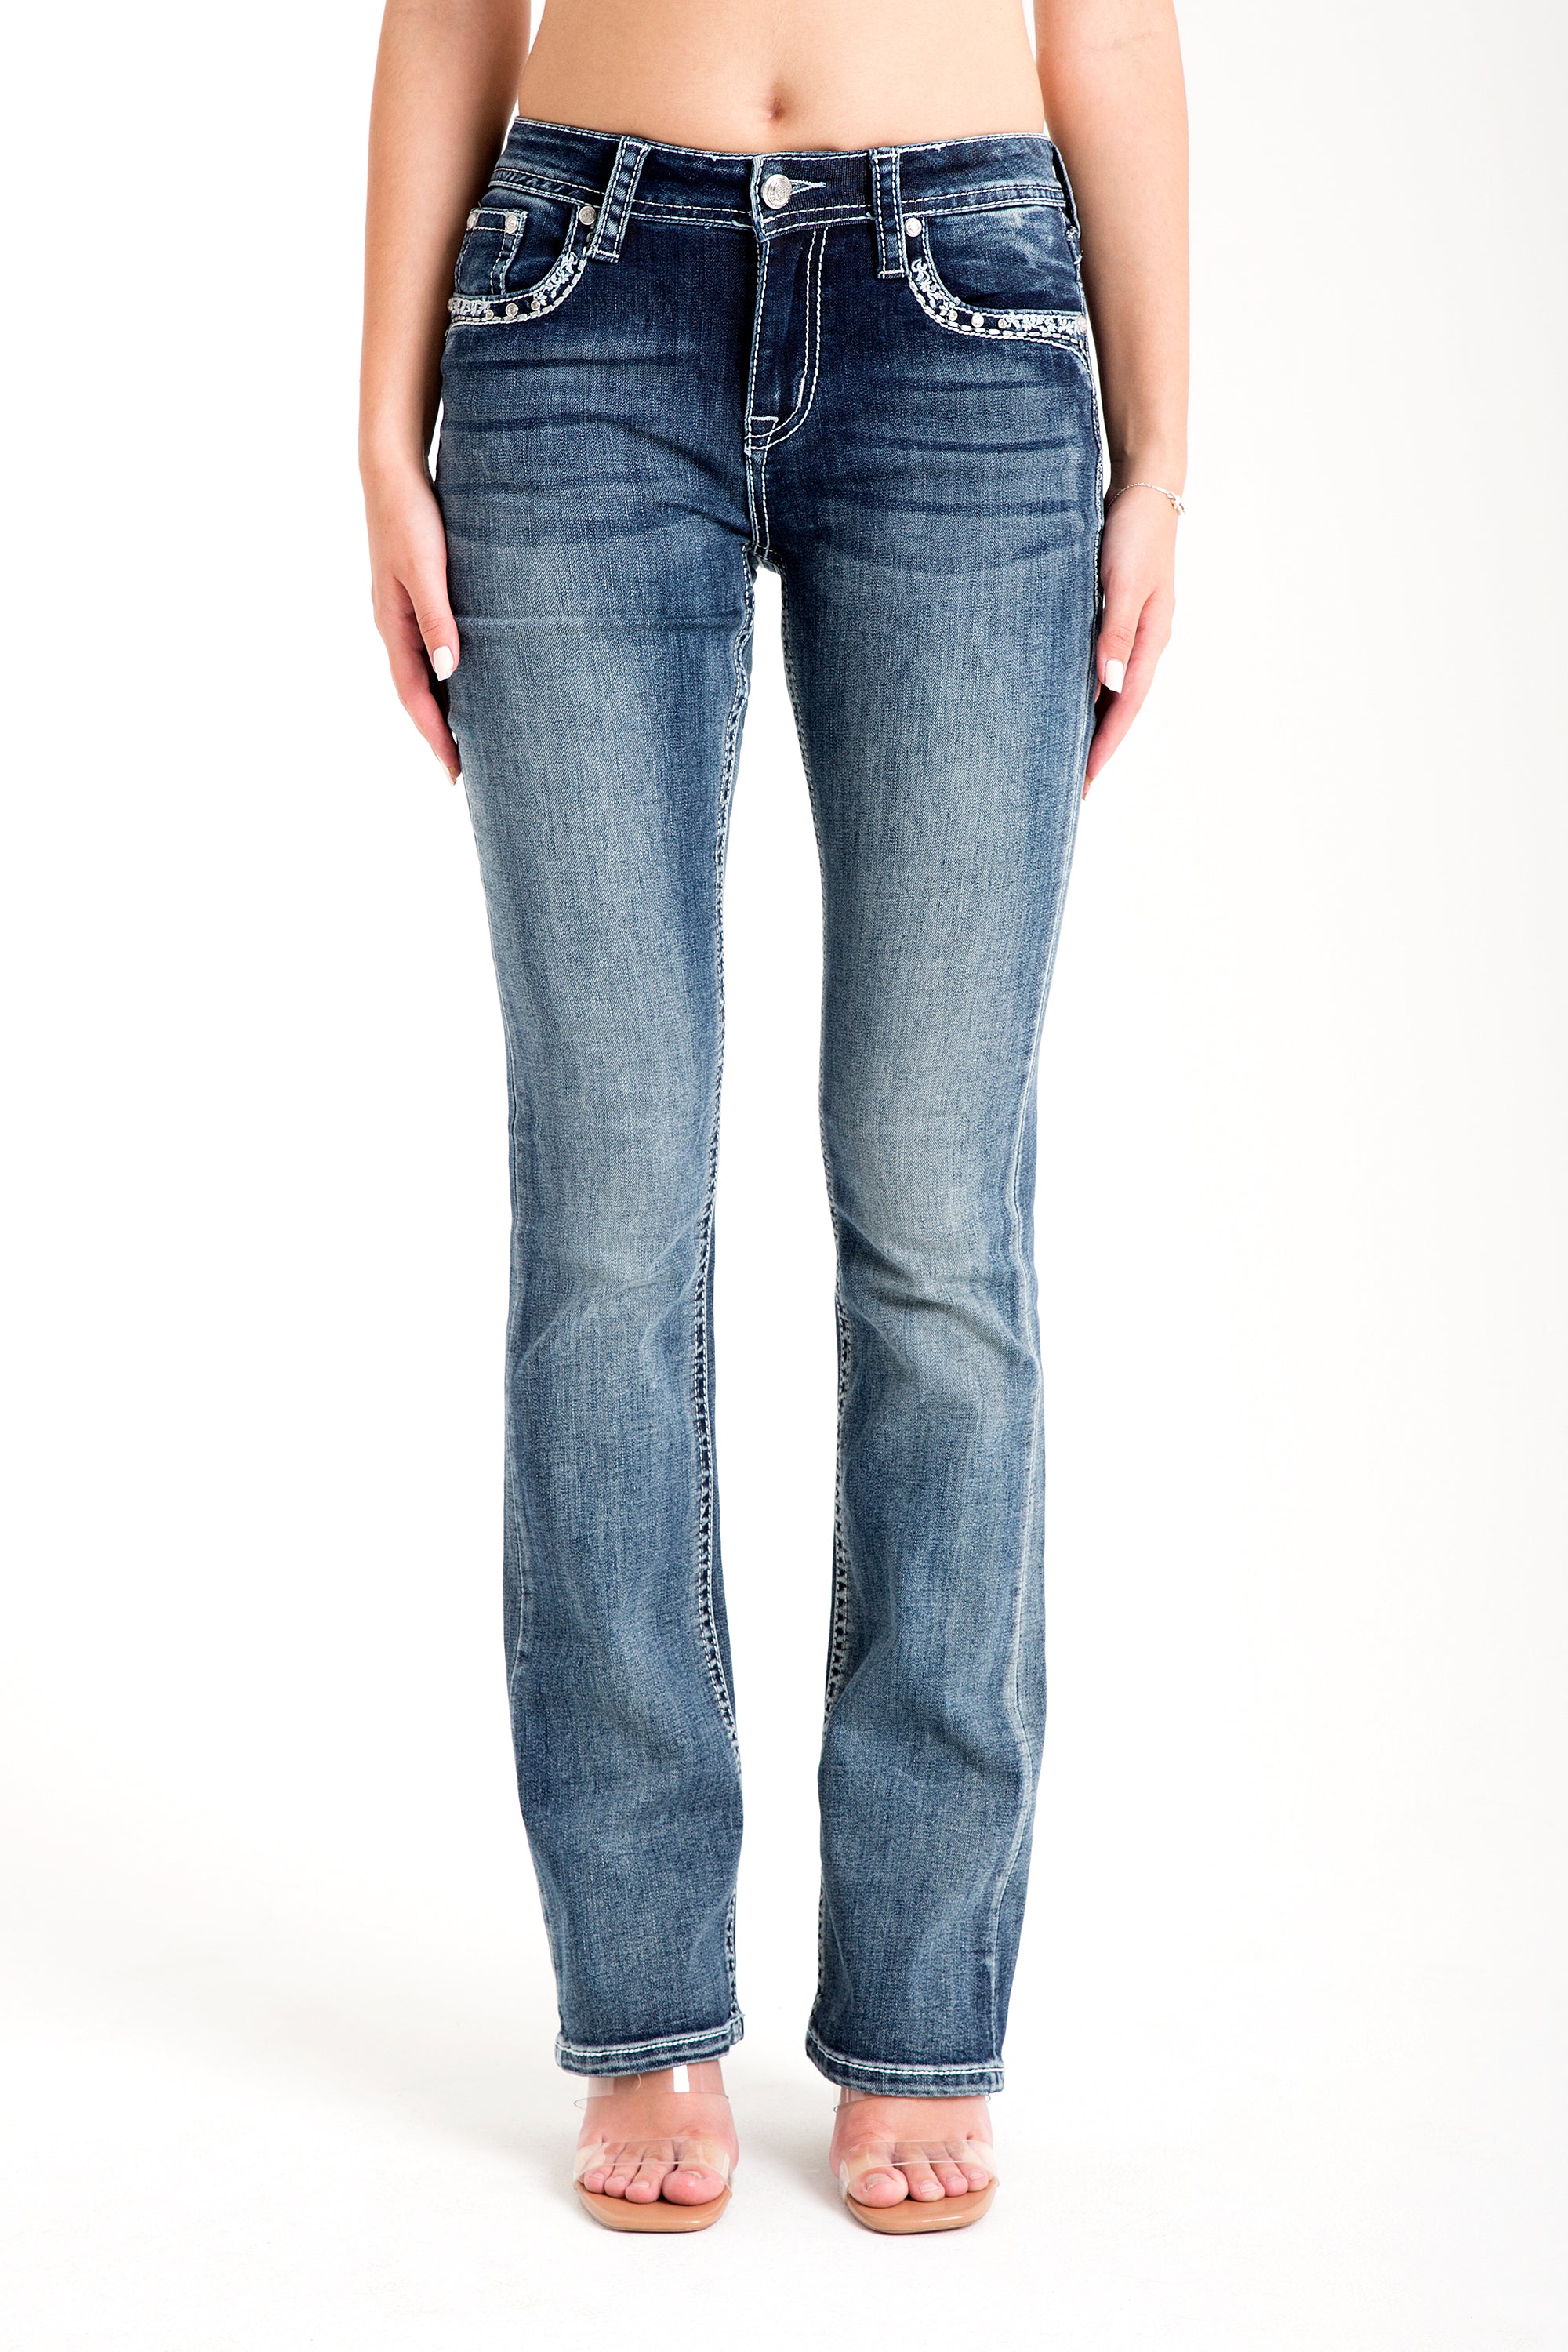 Buckle Modify Embellished Mid Rise Bootcut Jeans